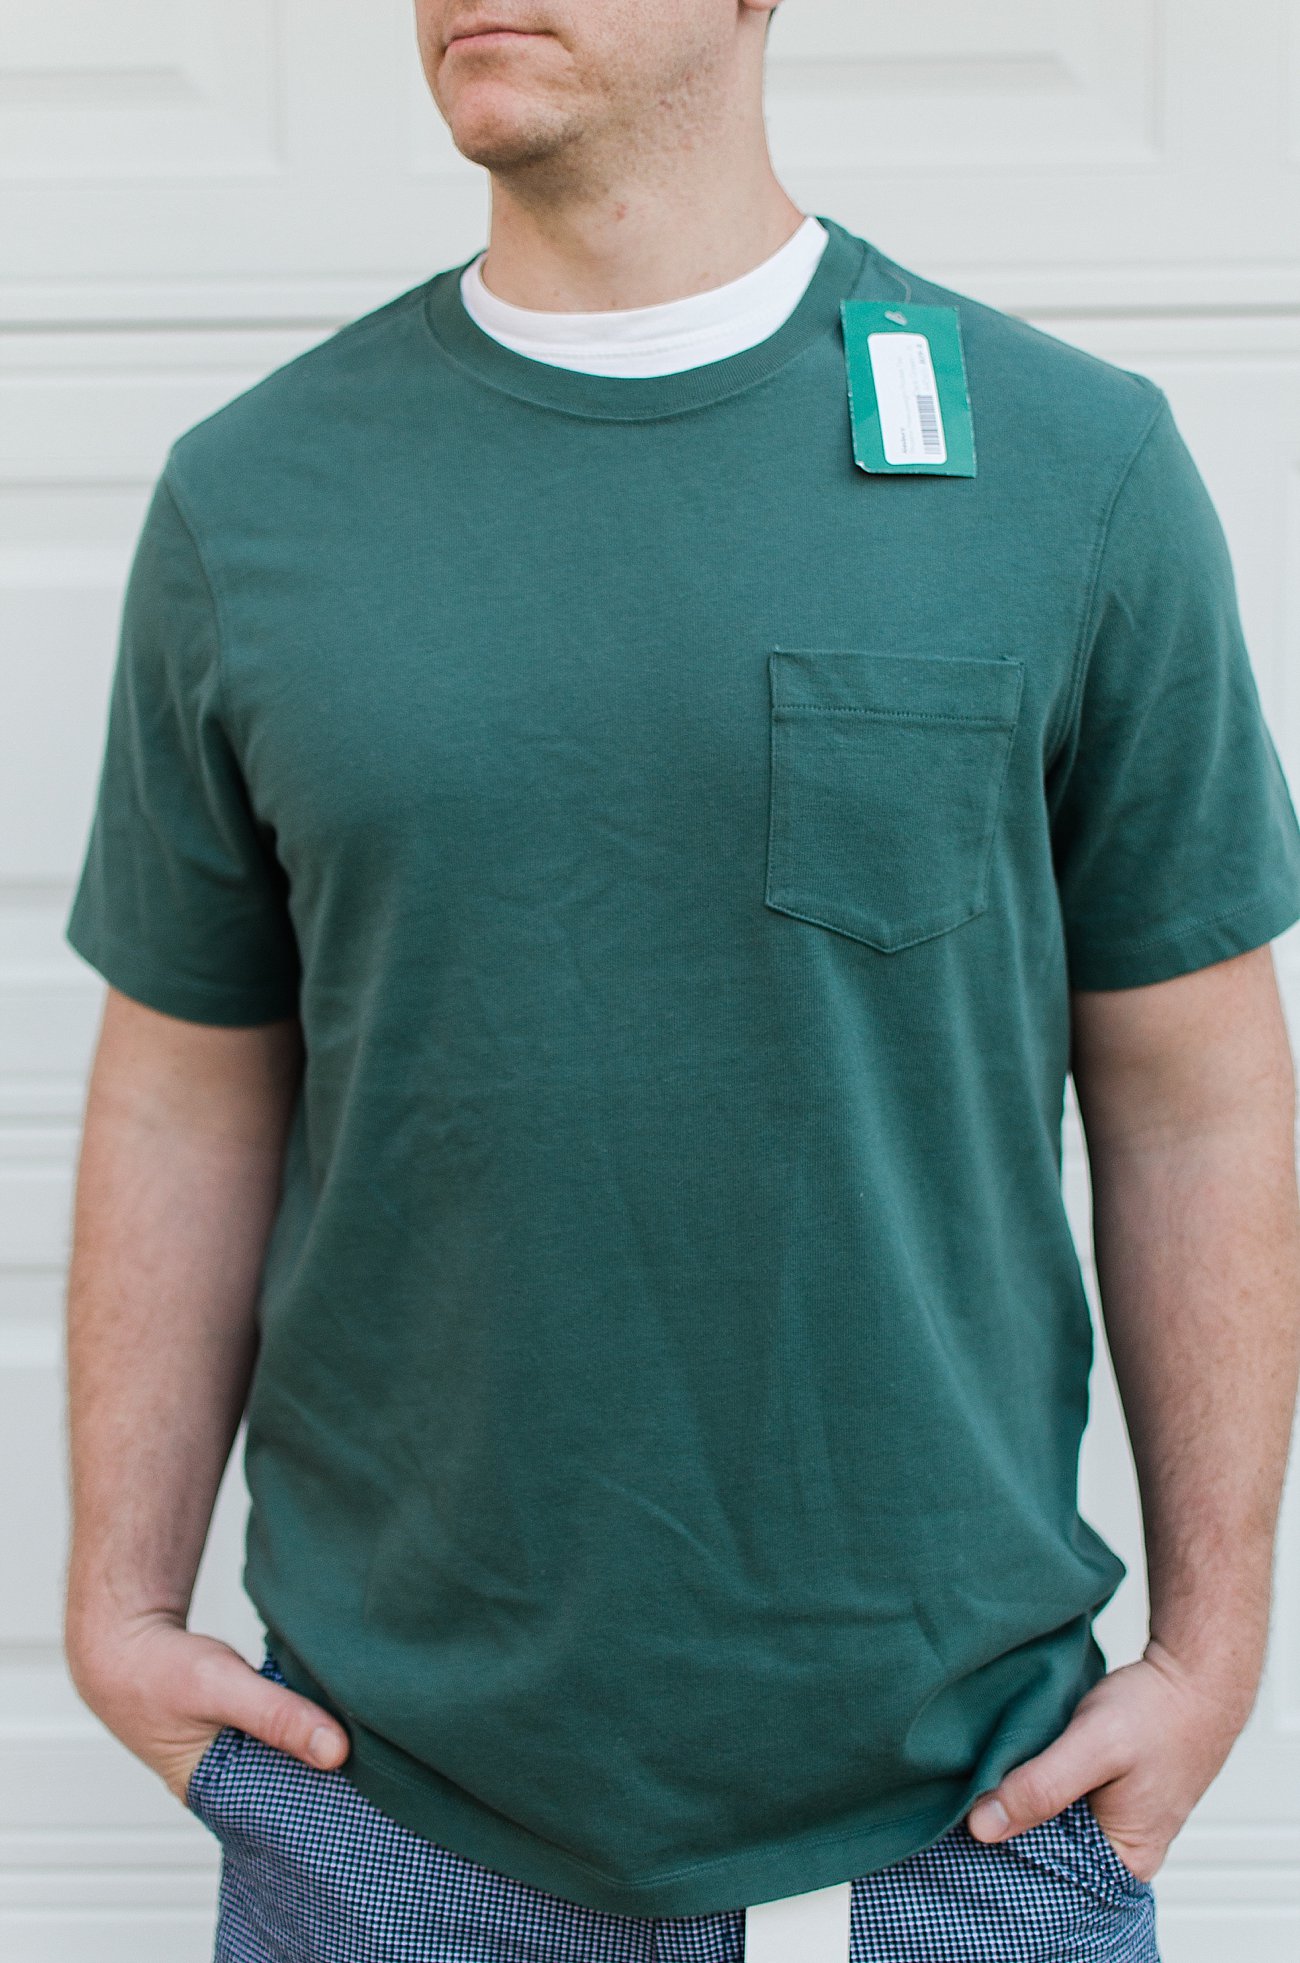 Alesbury - Phoenix Heavyweight Pocket Tee - Size XL - $28 - John's Recent Stitch Fix for Men Review by fashion blogger Still Being Molly